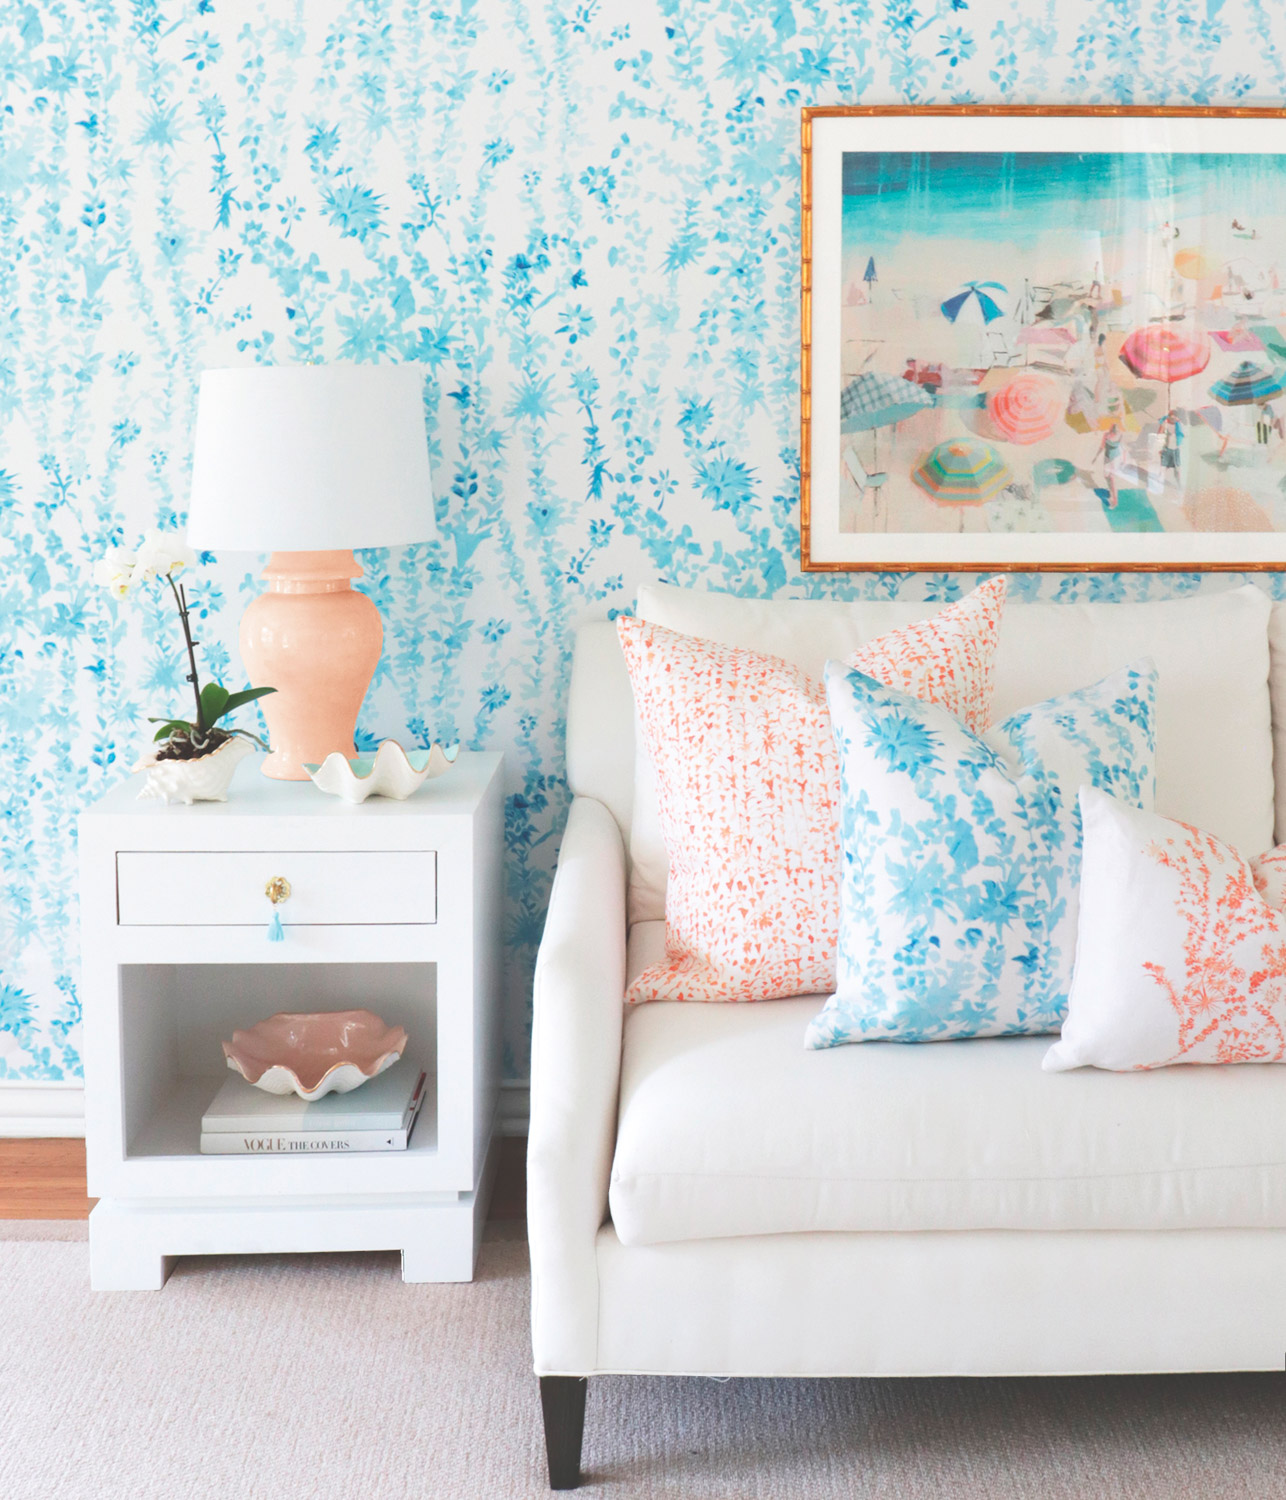 A living room setting with blue and coral patterned pillows, blue wallpaper and coral lamp 